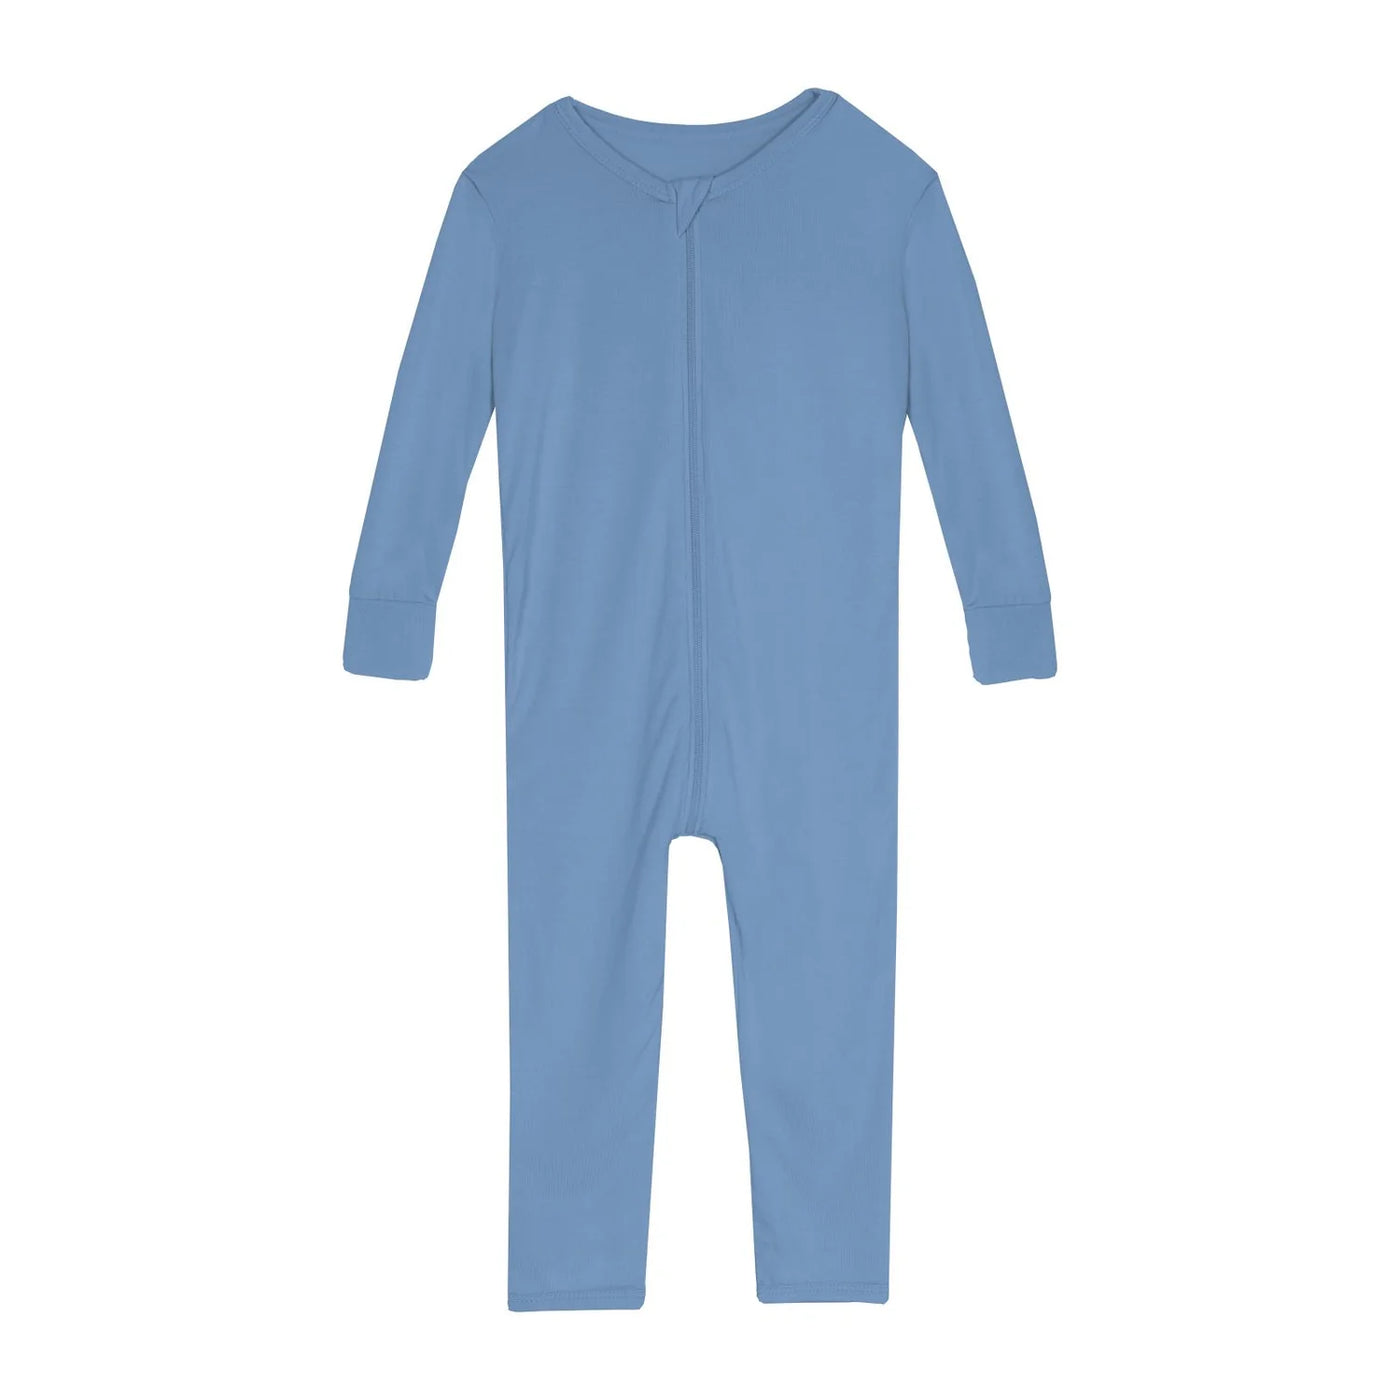 Kickee Pants Convertible Sleeper with Zipper: Solid Dream Blue